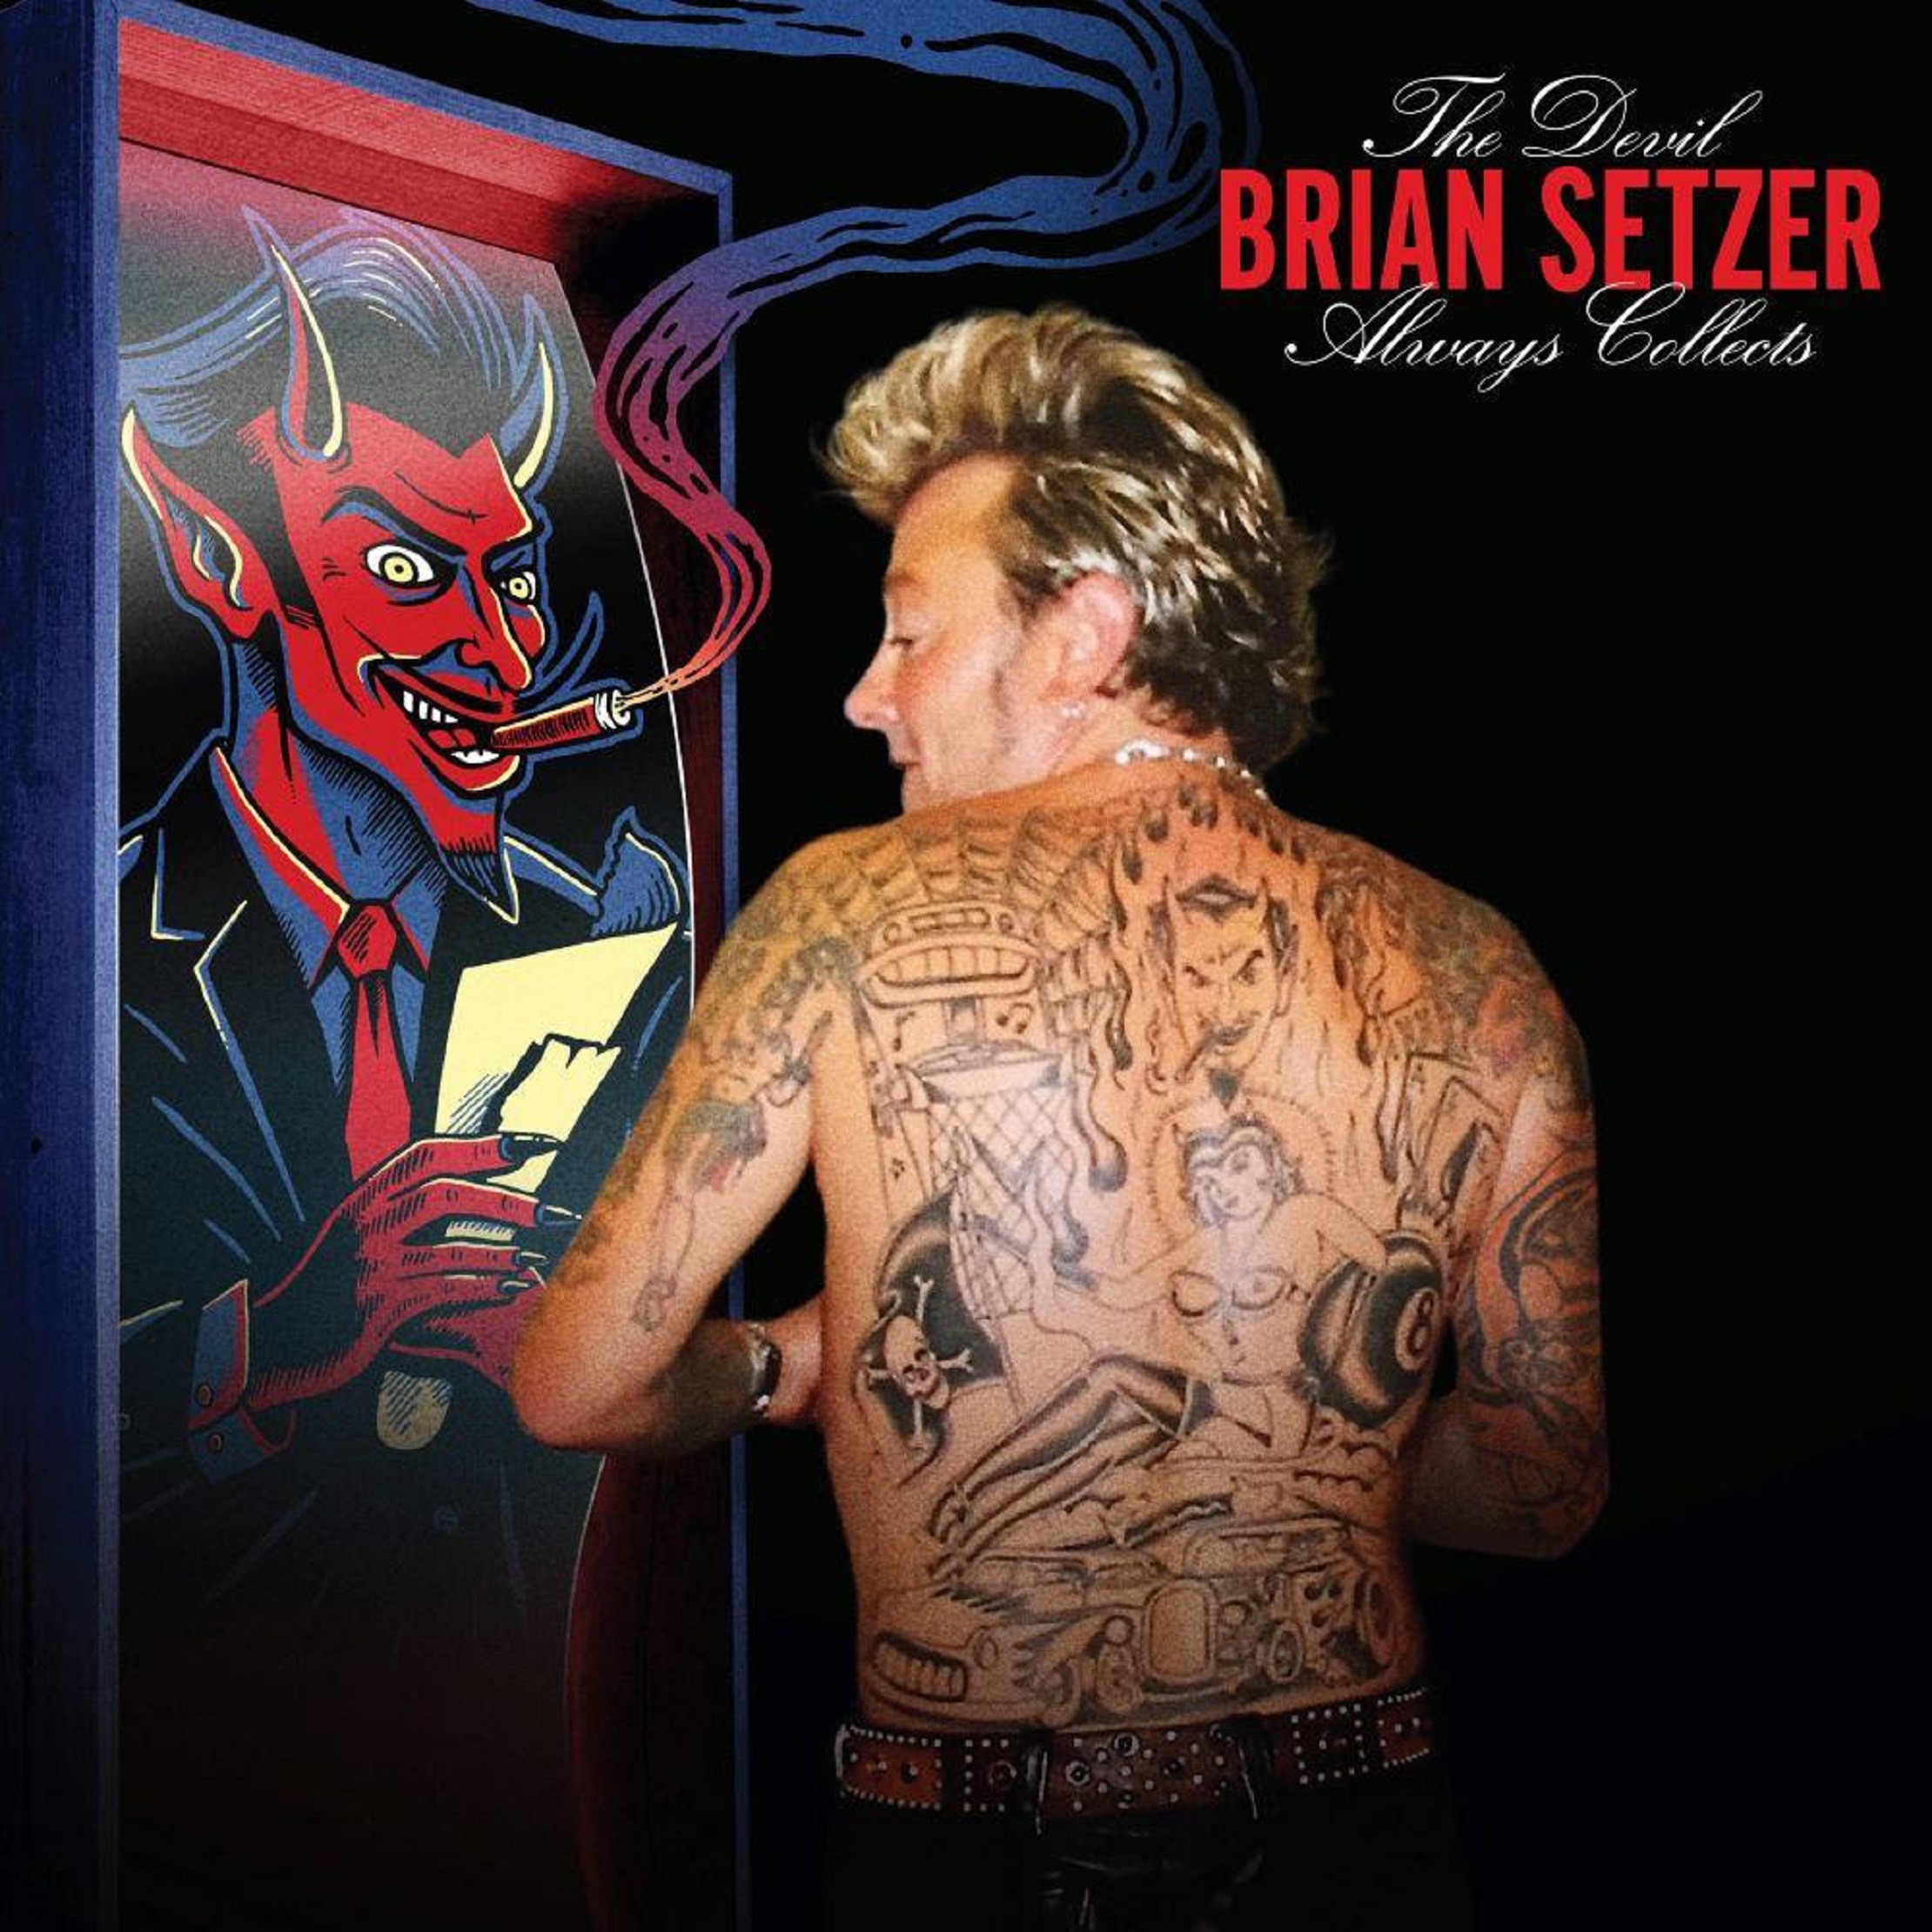 BRIAN SETZER To Release New Solo Album ‘The Devil Always Collects’ On September 15; First Single And Video “Girl On The Billboard” Out Today